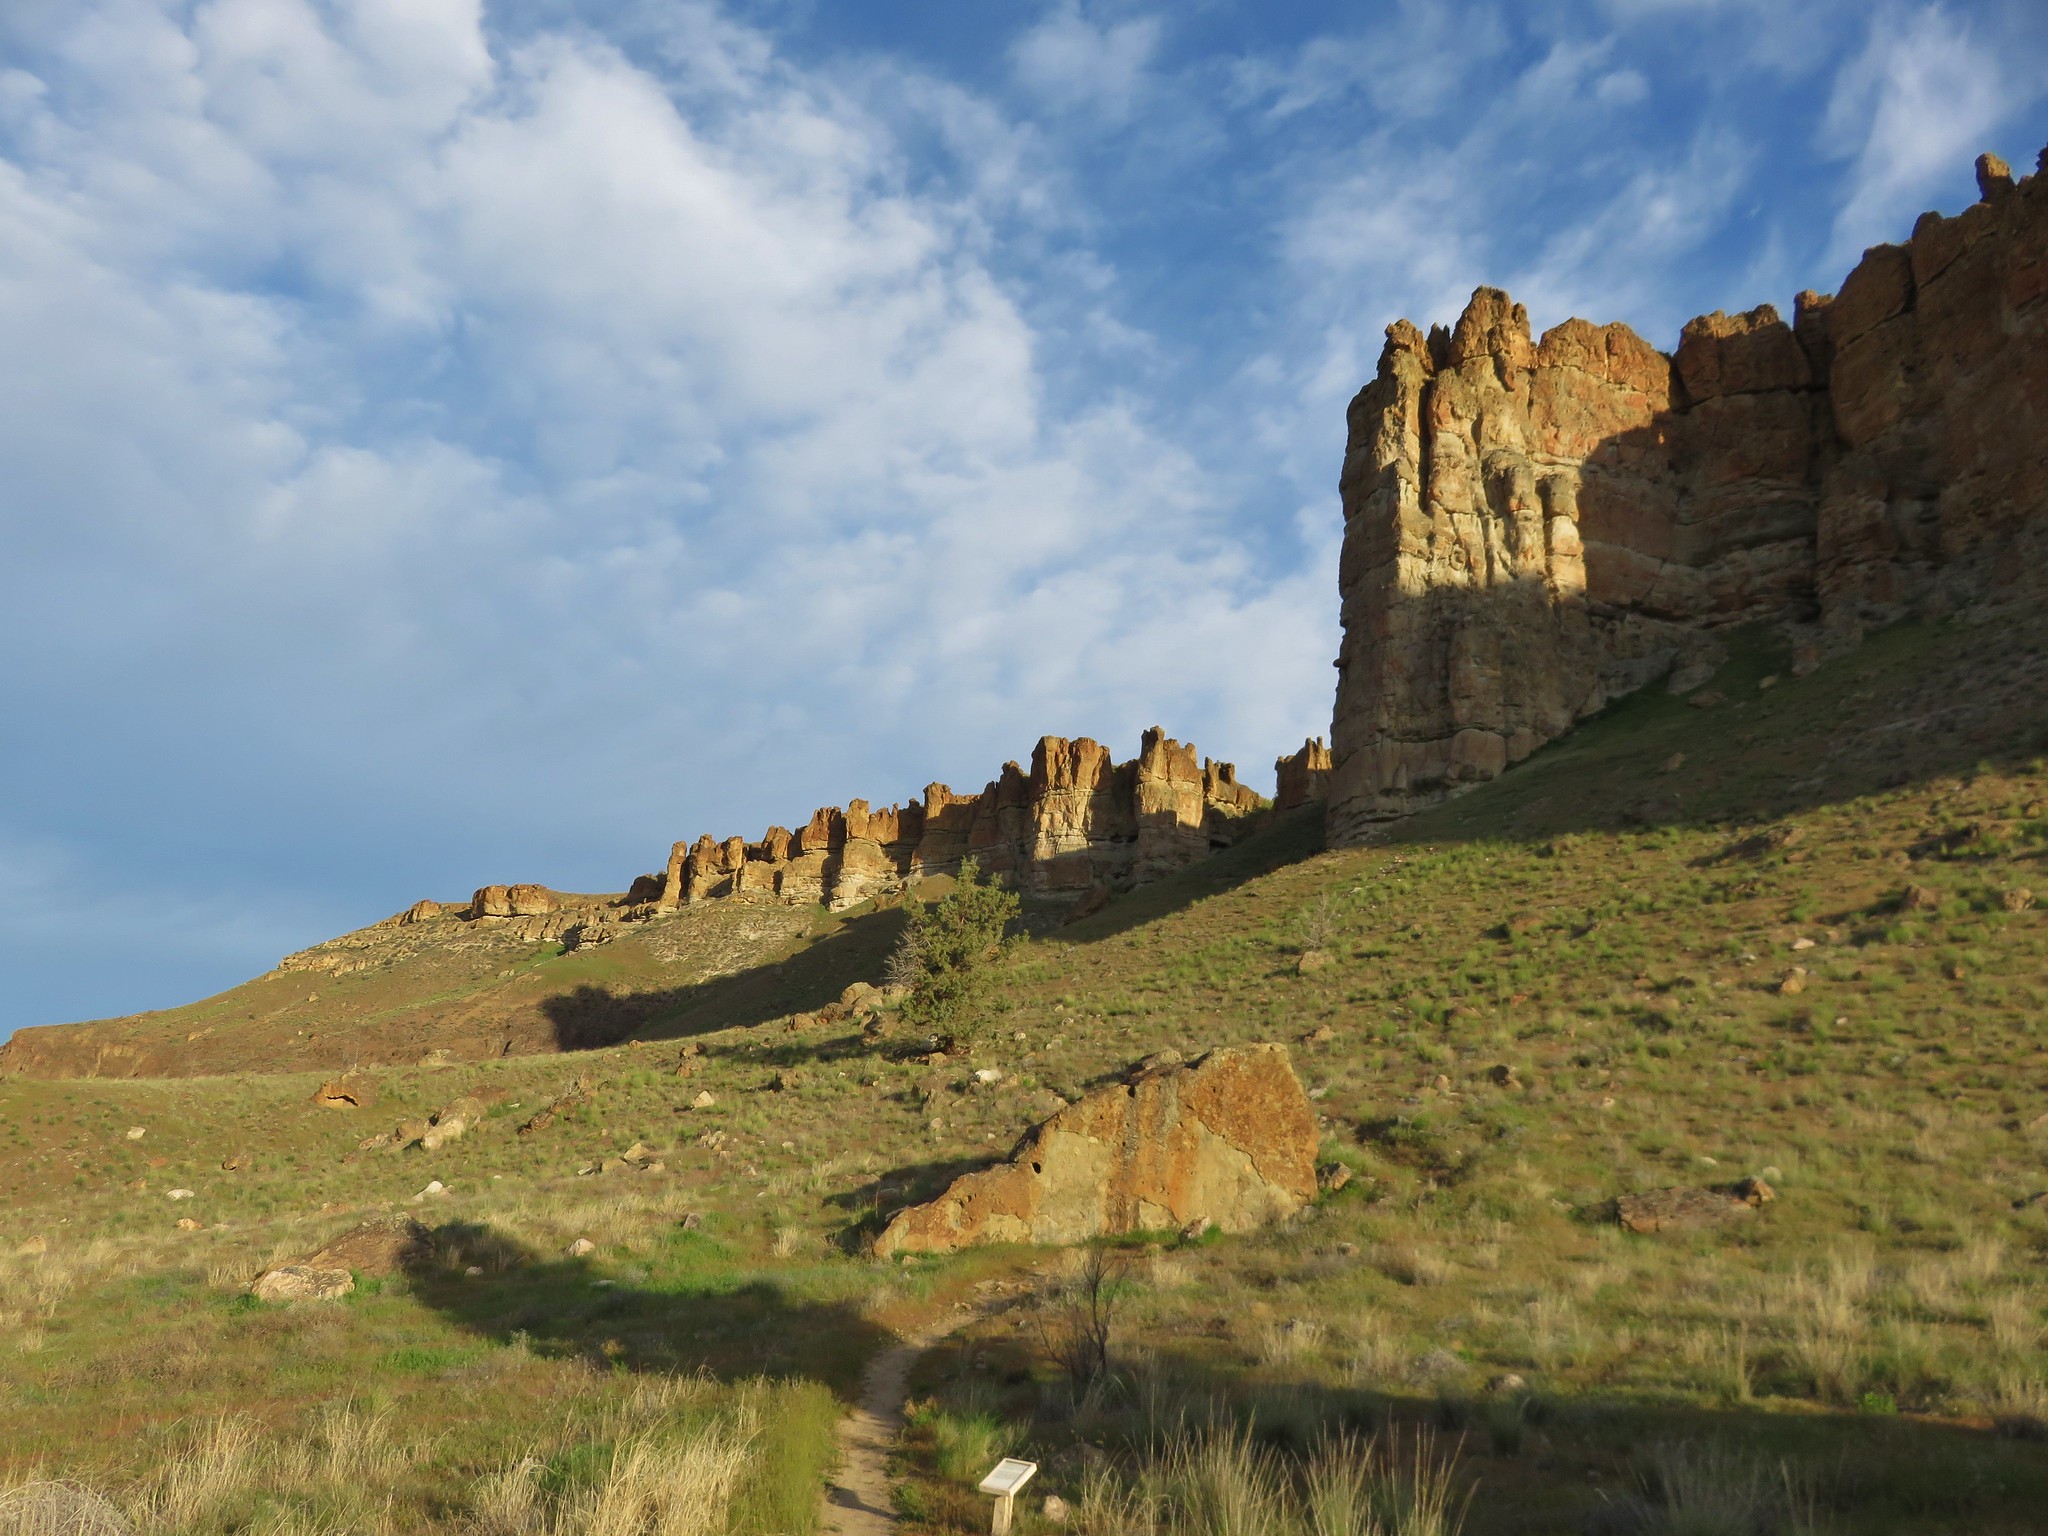 Clarno Unit - John Day Fossil Beds